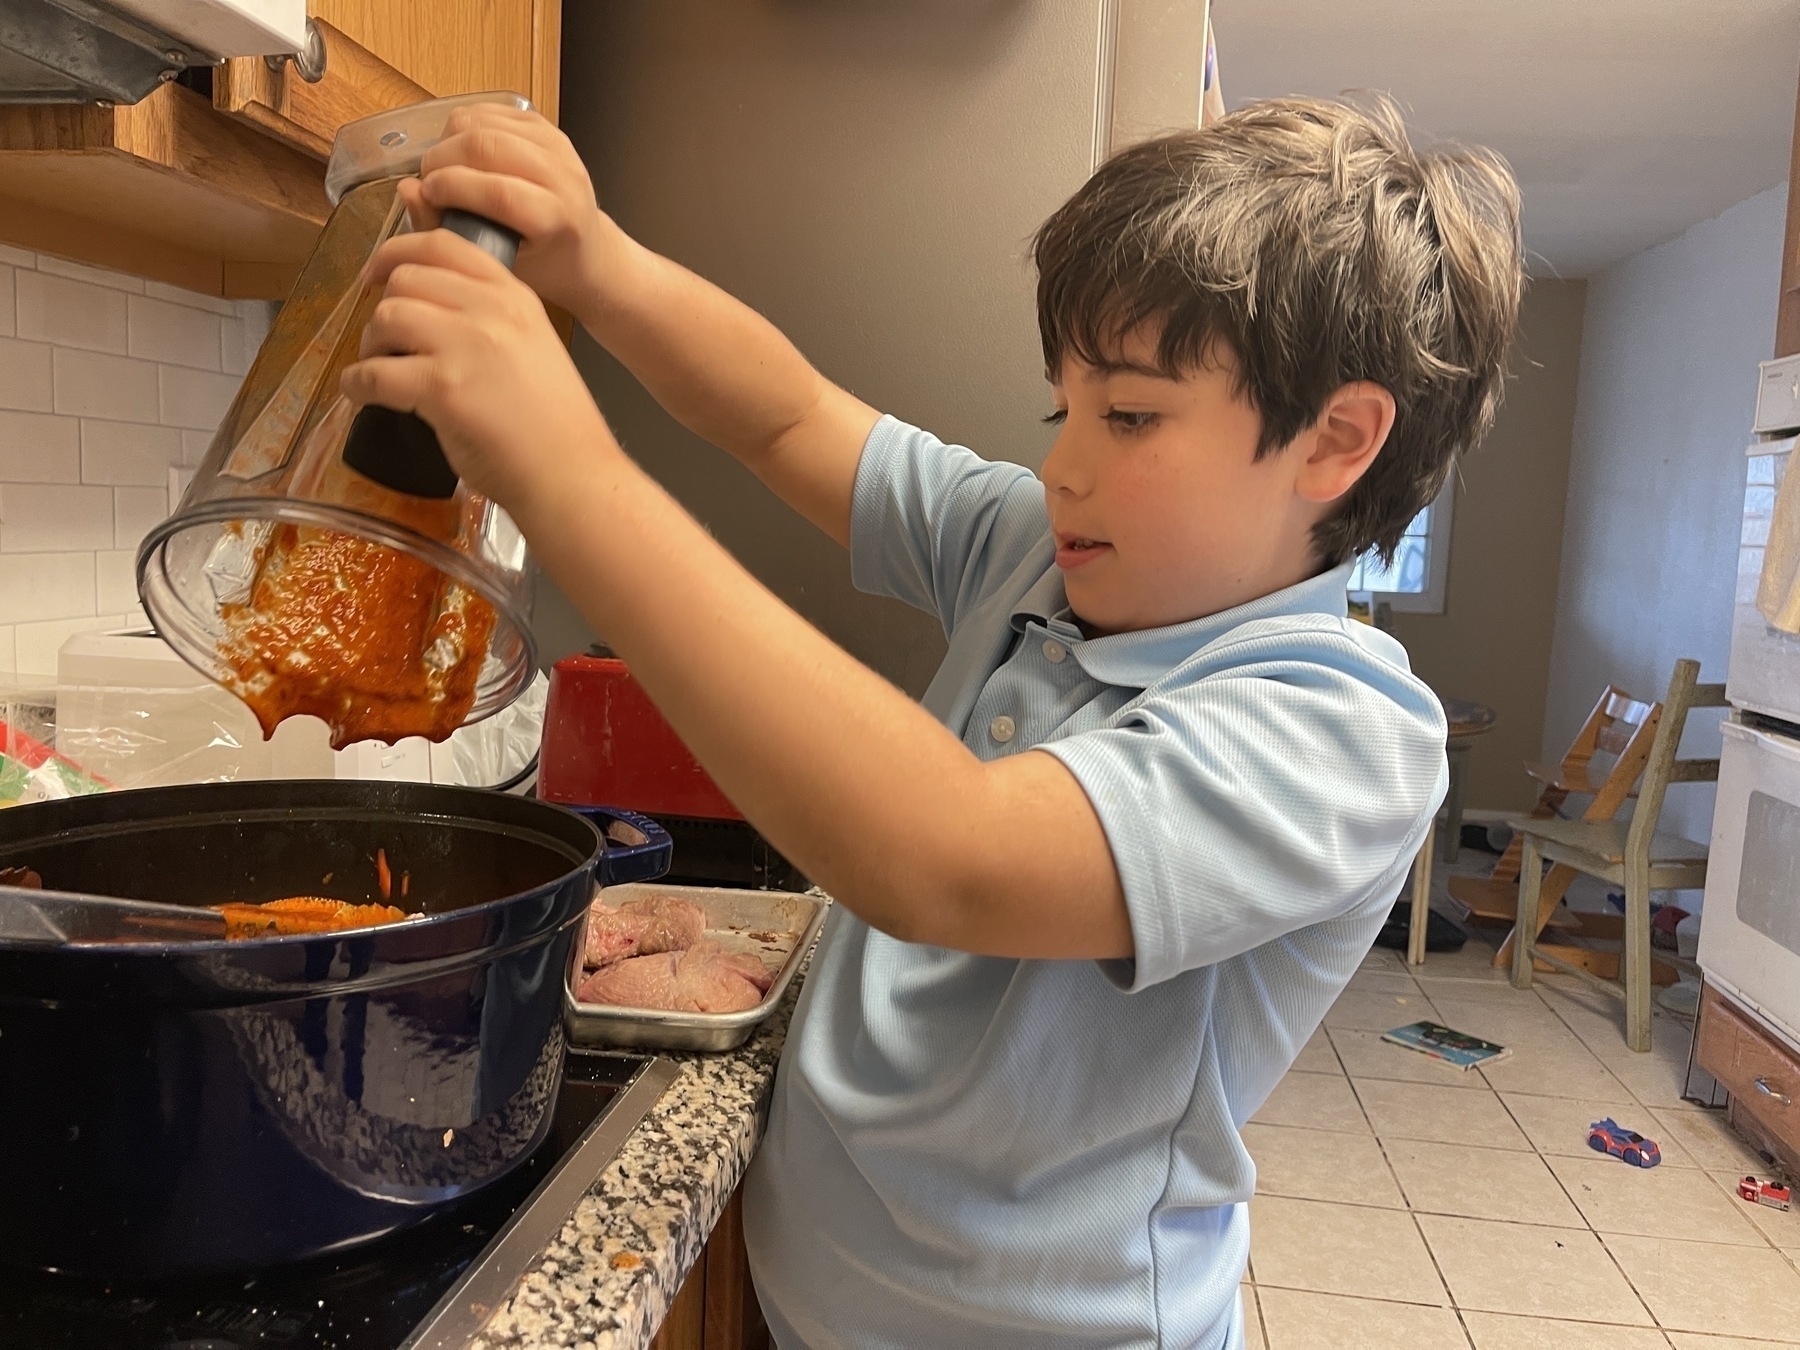 Young boy pouring red sauce into cooking pot